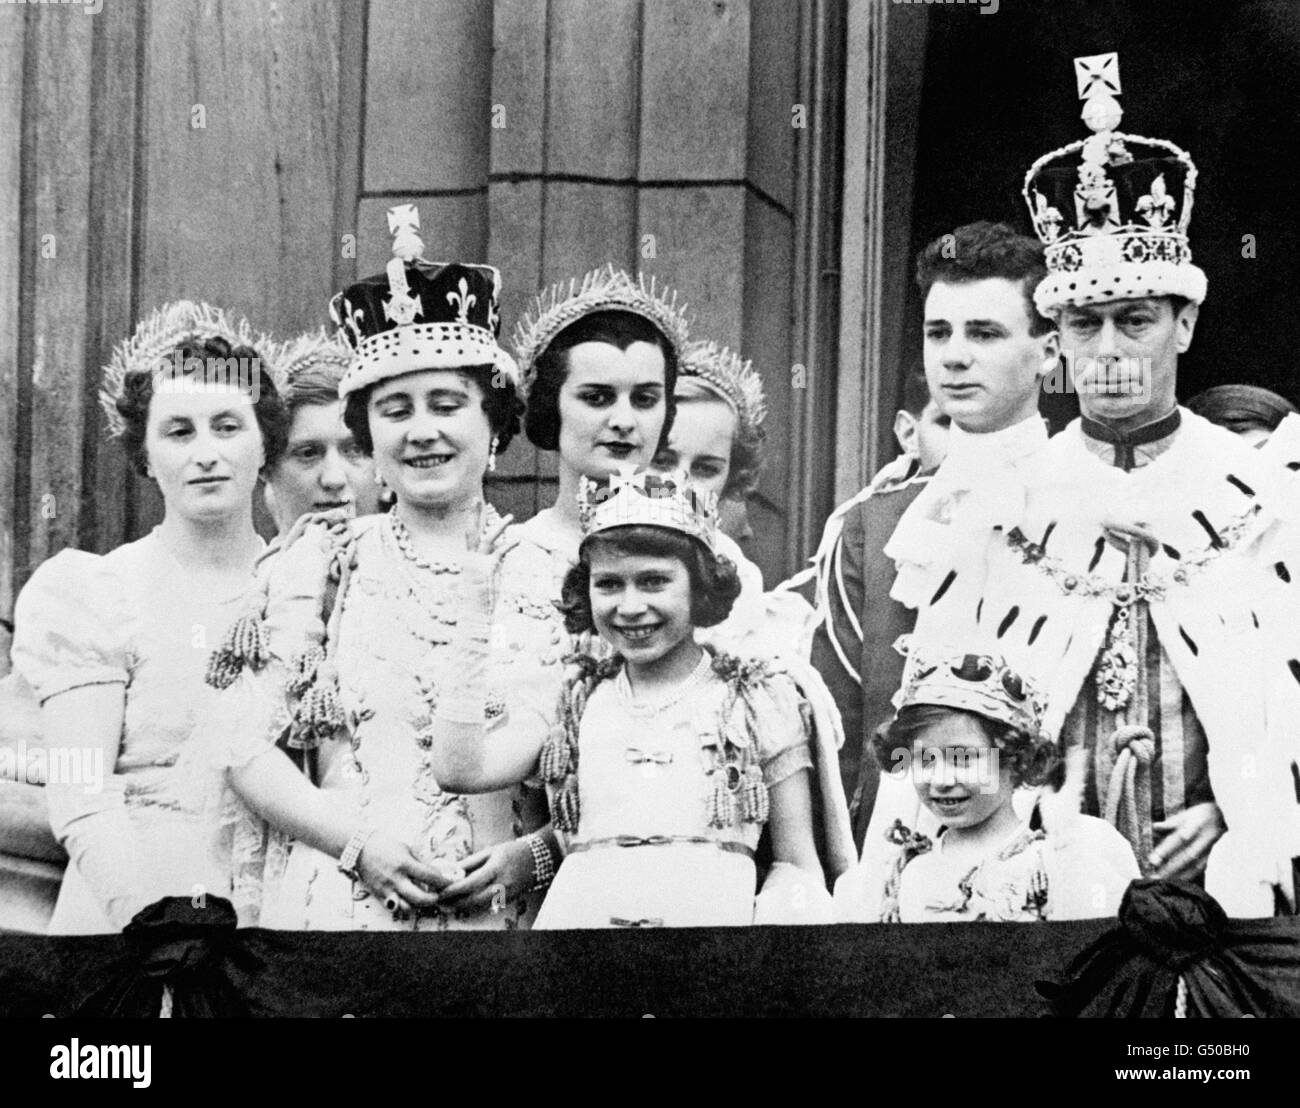 (L-R) Queen Elizabeth (later the Queen Mother), Princess Elizabeth (the present Queen Elizabeth II), Princess Margaret and King George VI after his coronation, on the balcony of Buckingham Palace, London. Stock Photo